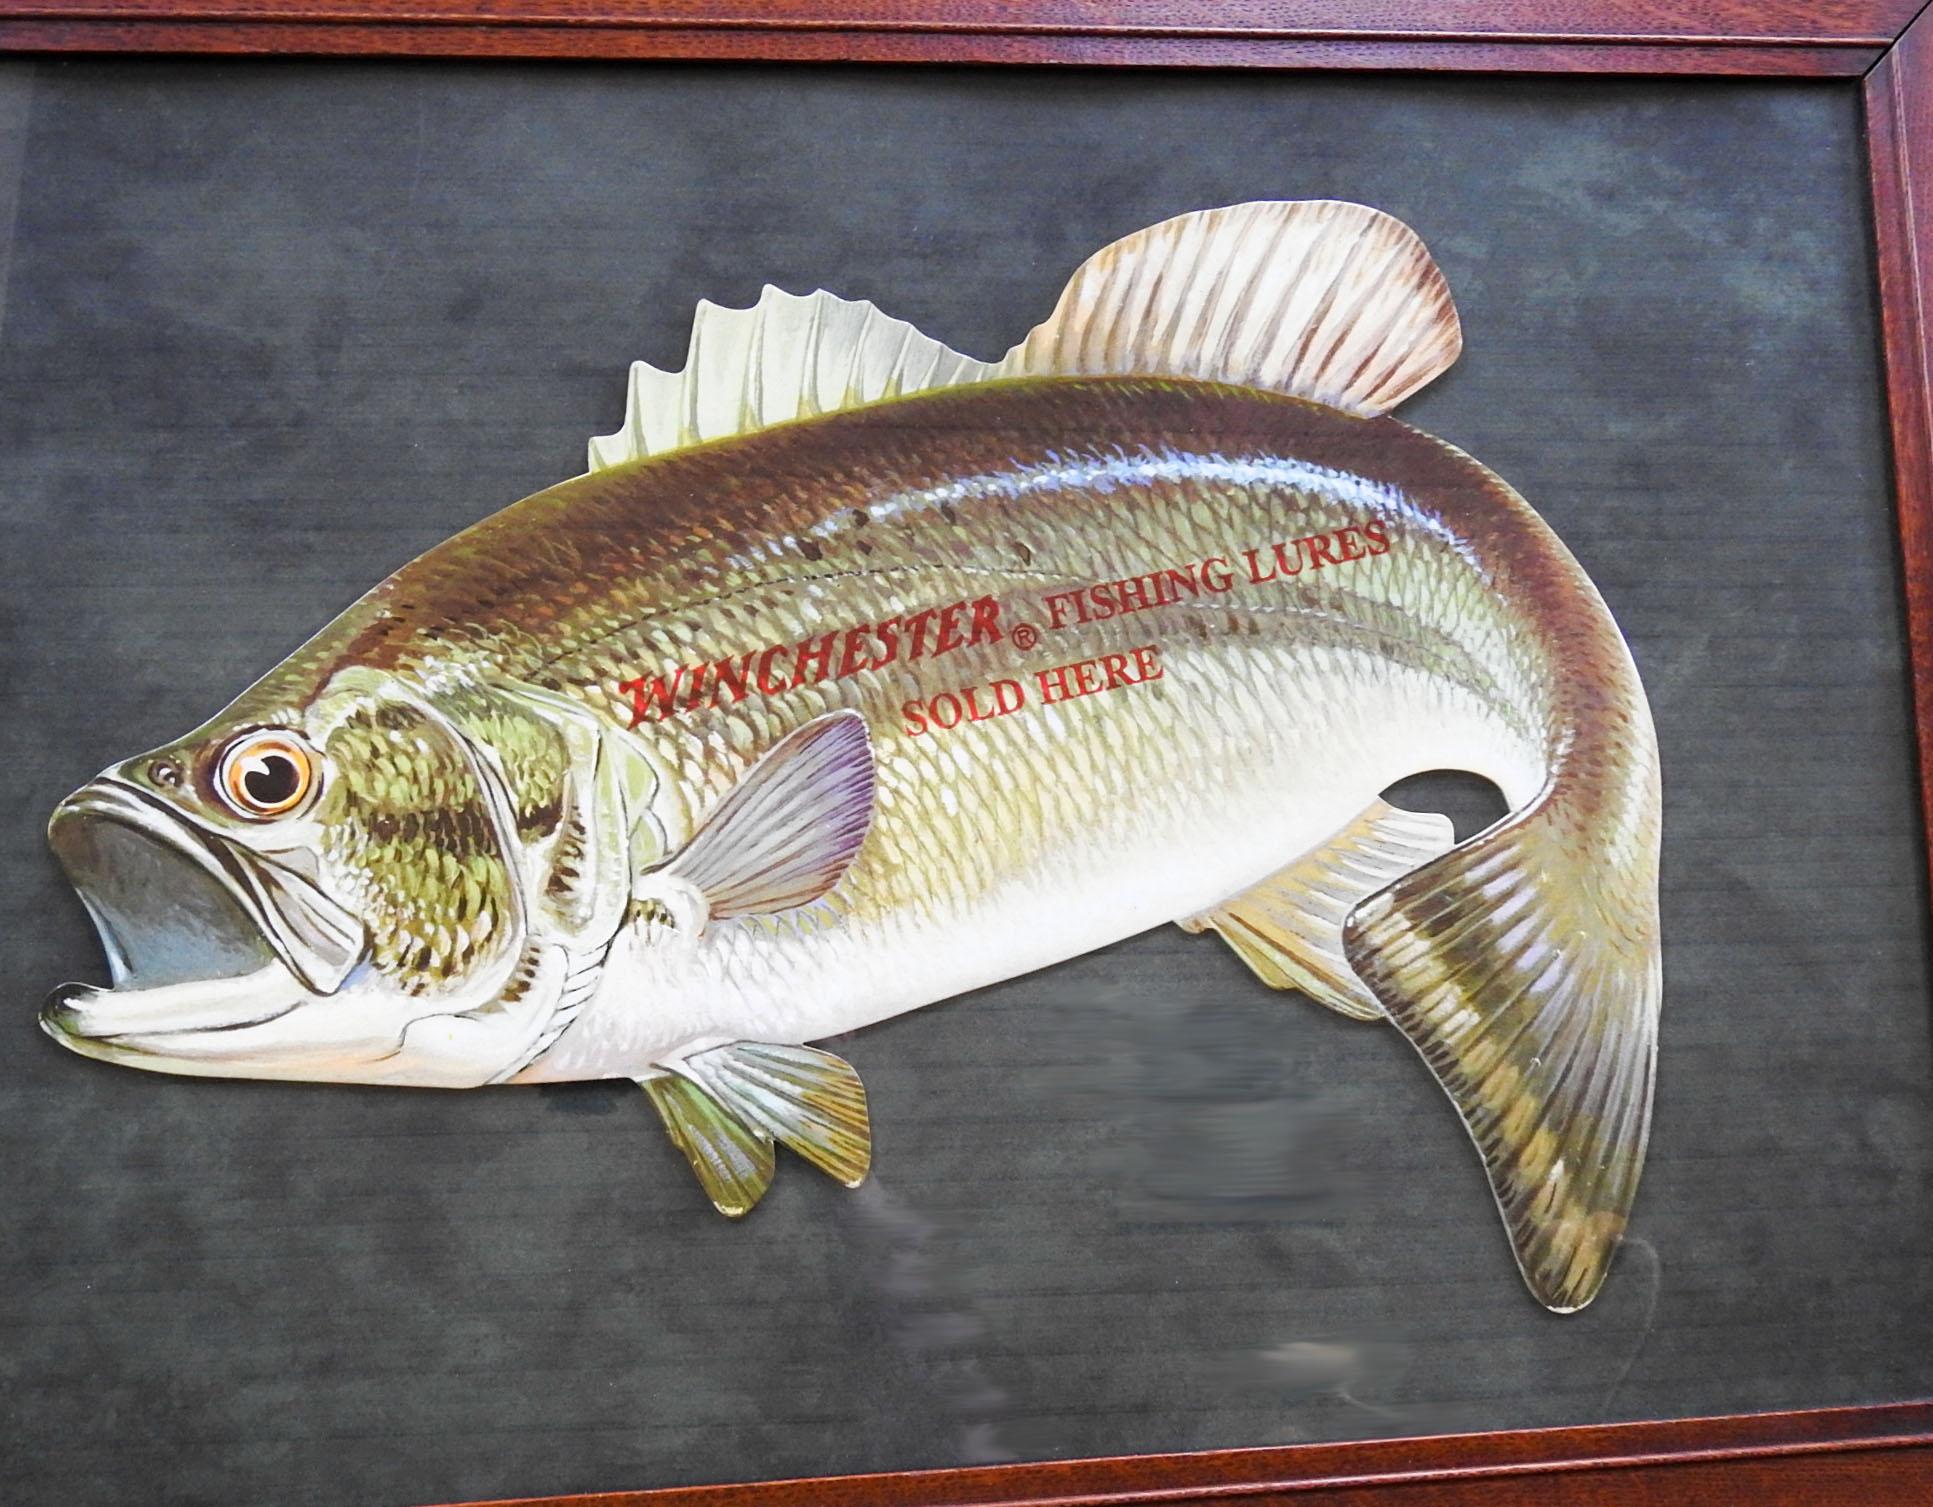 Rustic Vintage Winchester Fishing Lures Sold Here Die Cut Sign